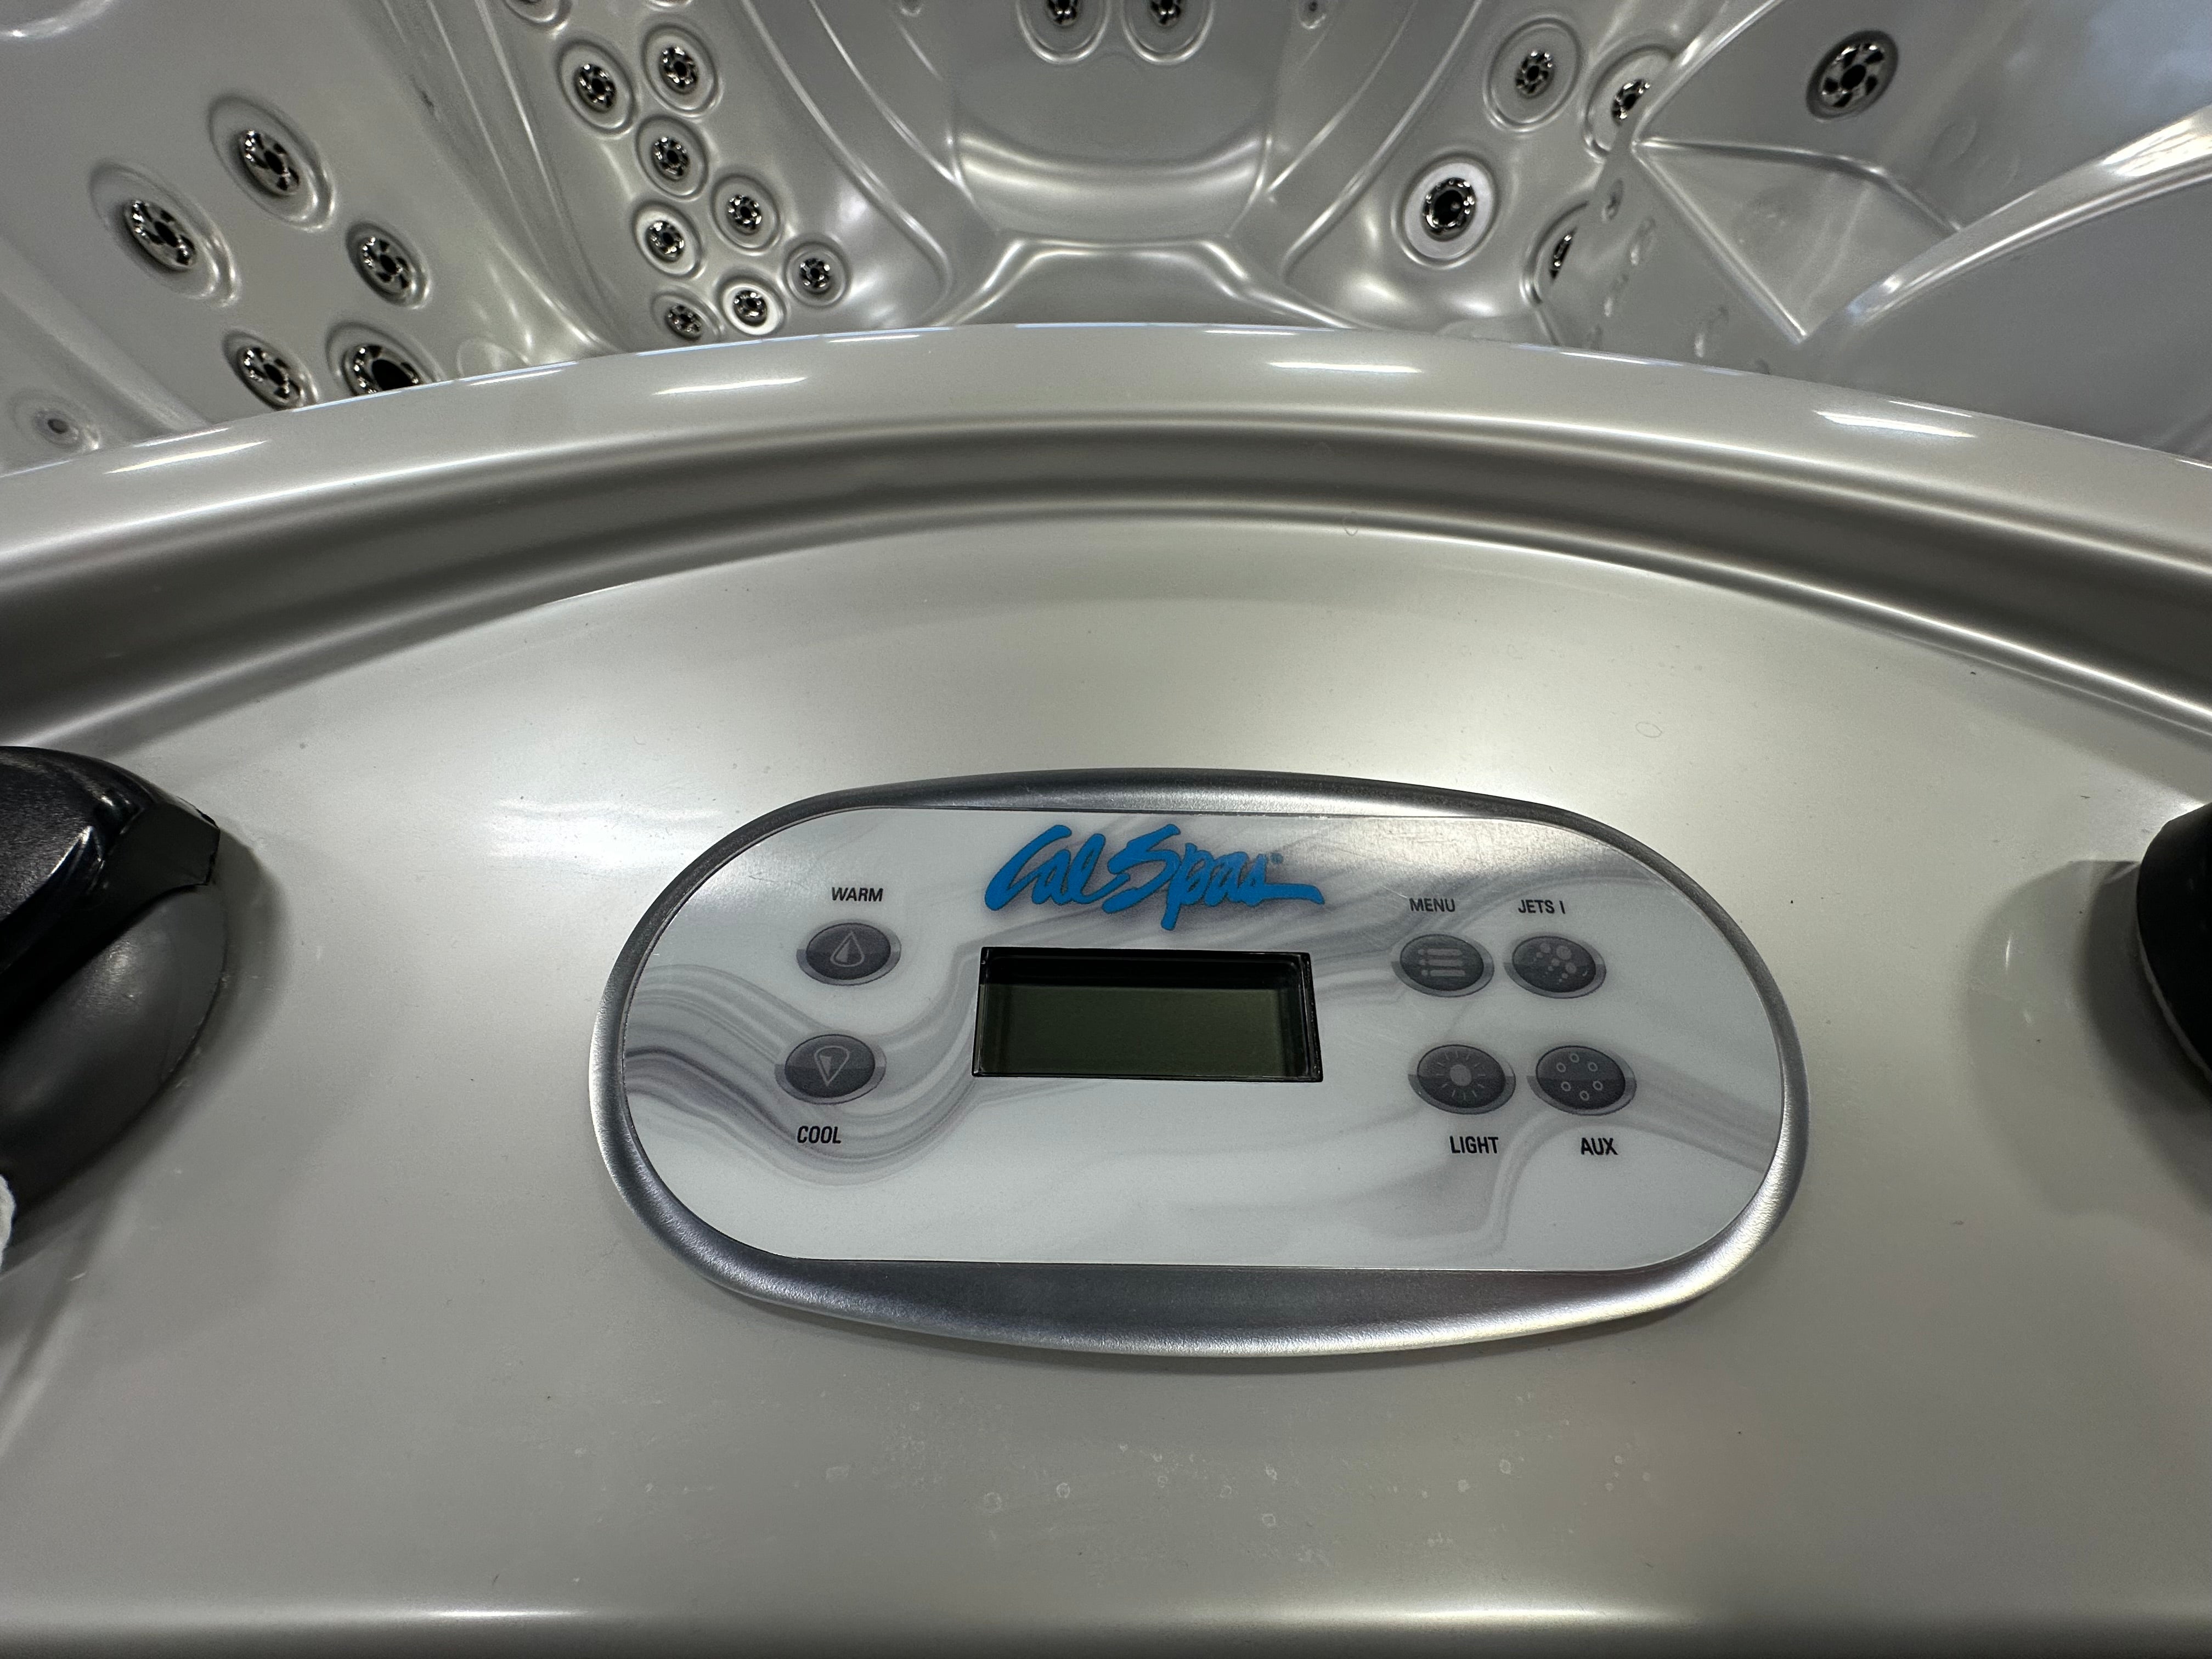 PPZ-743LC Pacifica Plus by Cal Spa